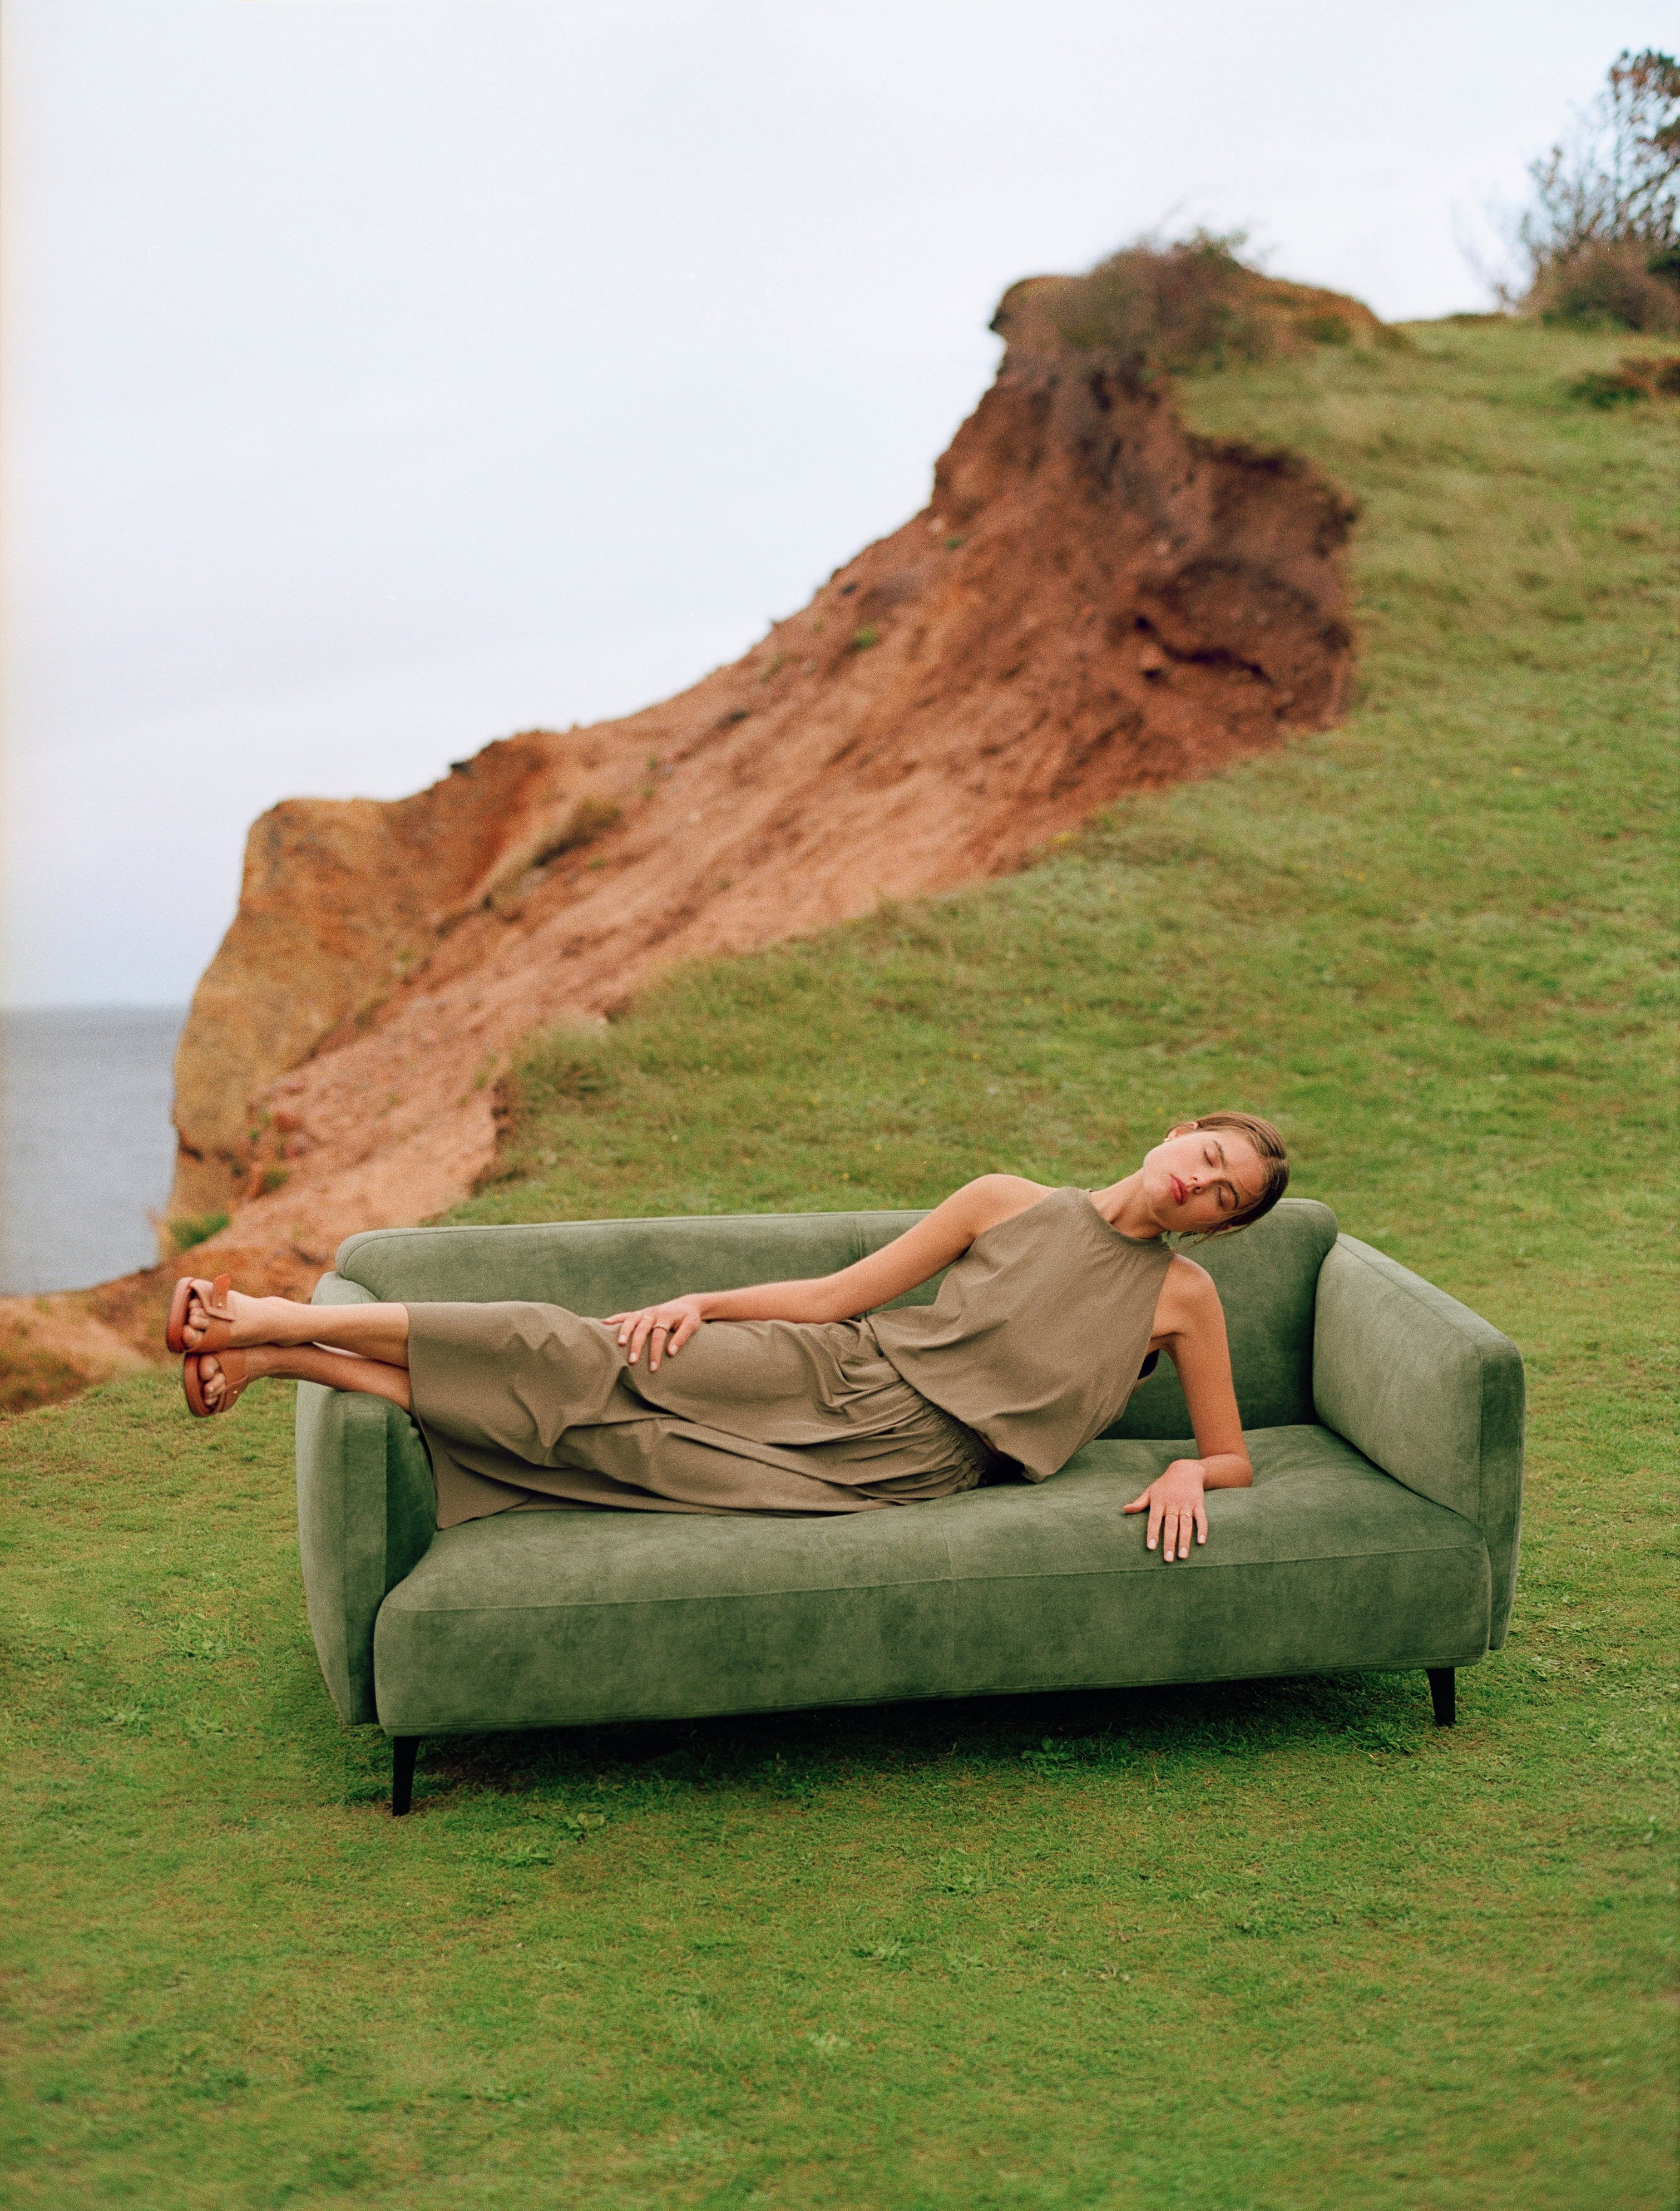 Woman reclining on a Modena sofa in a grassy outdoor setting with coastal cliffs.